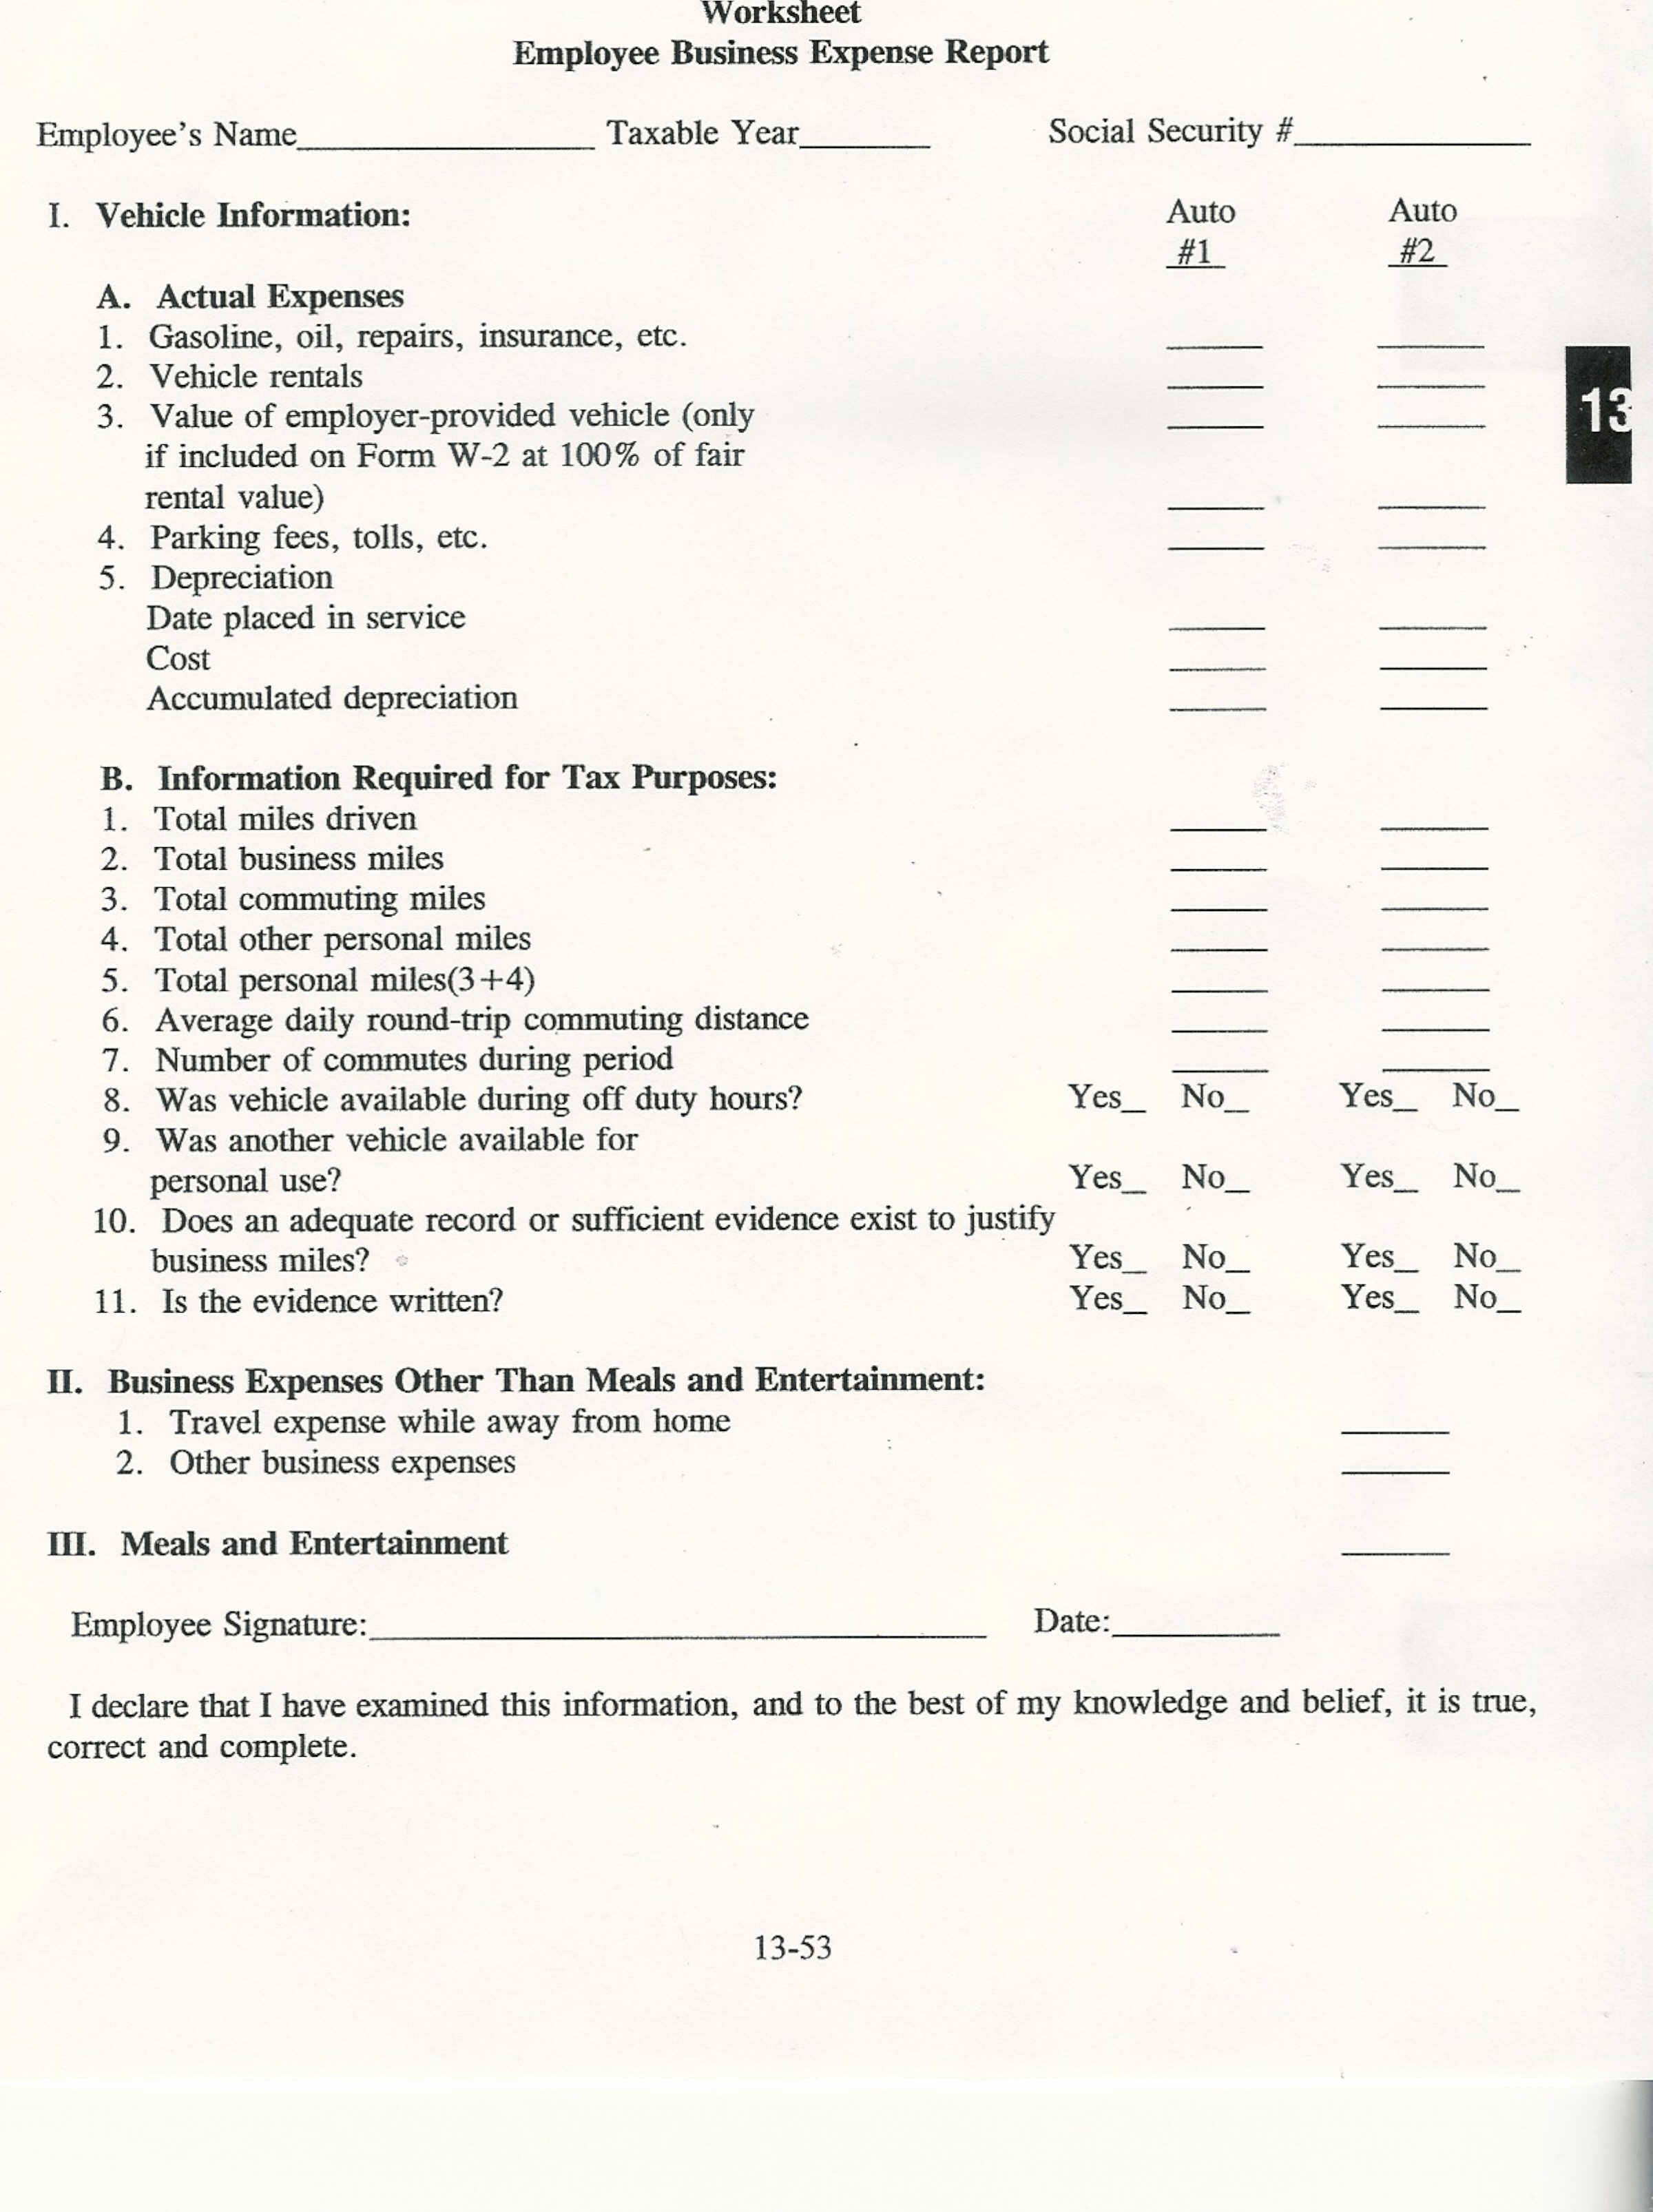 Questions Self Employed Tax Deduction Worksheet Annual 2 inside Self